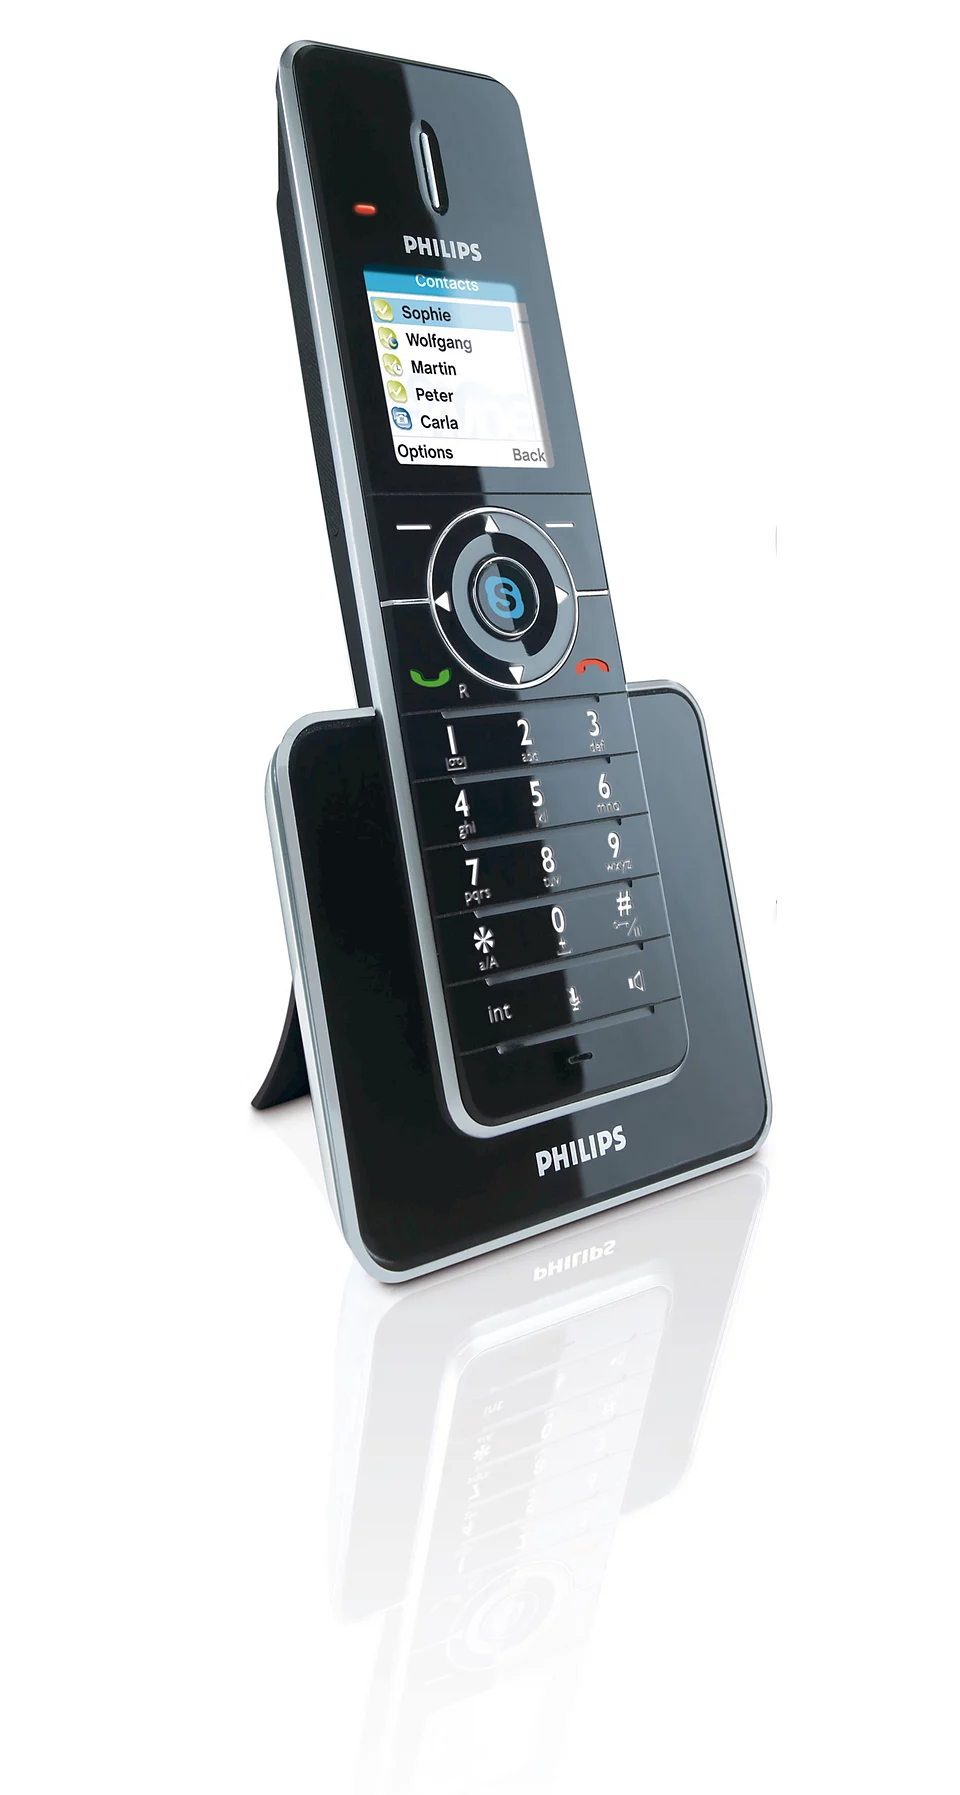 VOIP8550B/26